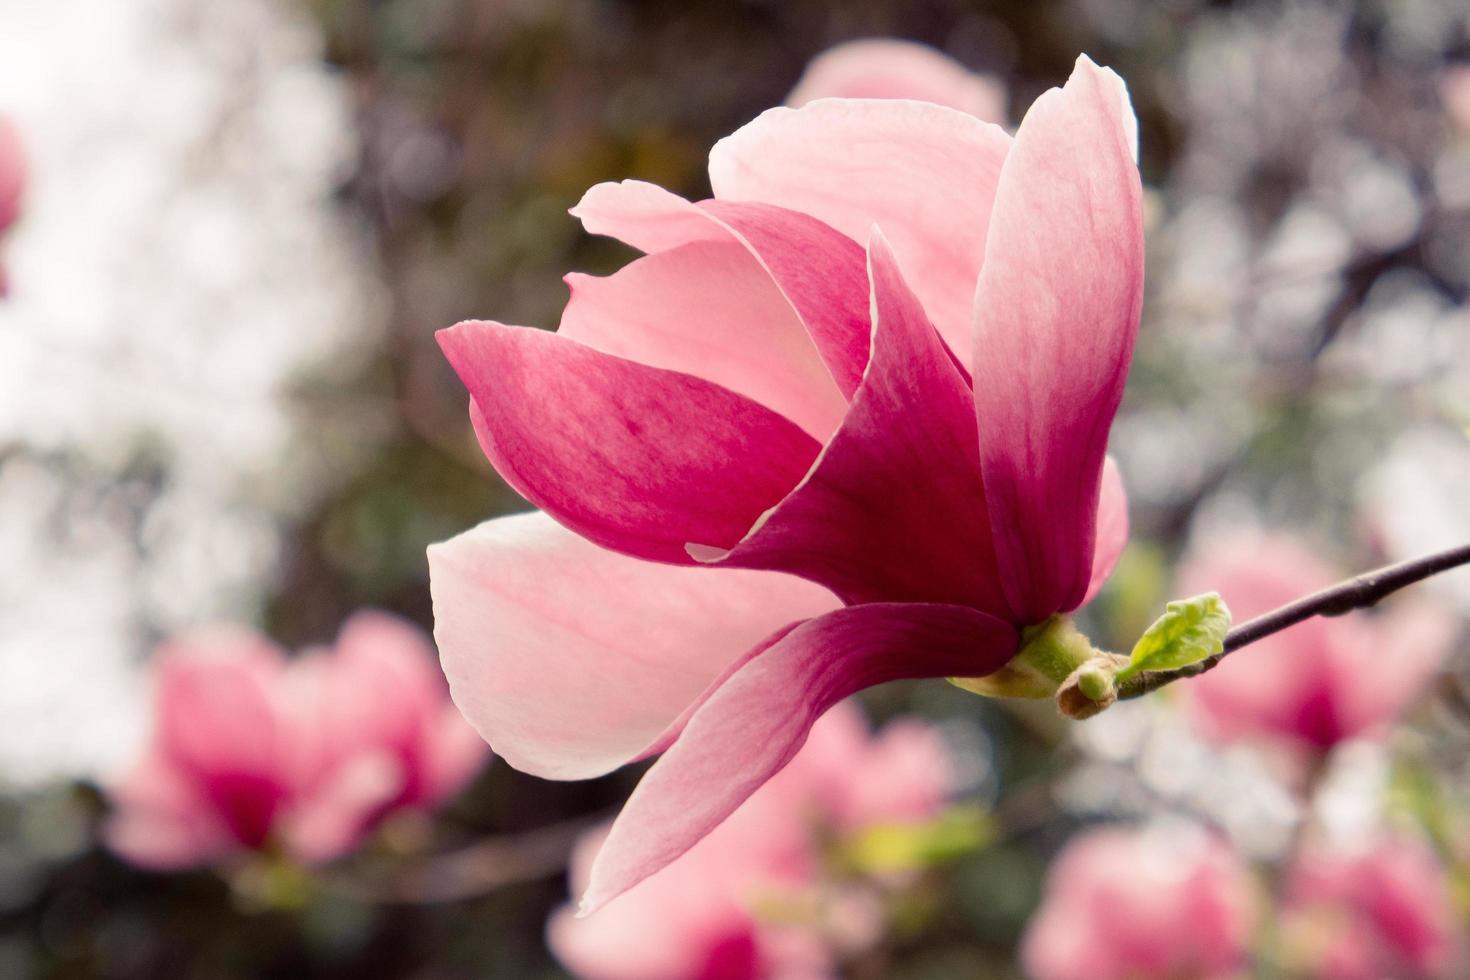 Pink magnolia flower with a blurred background photo